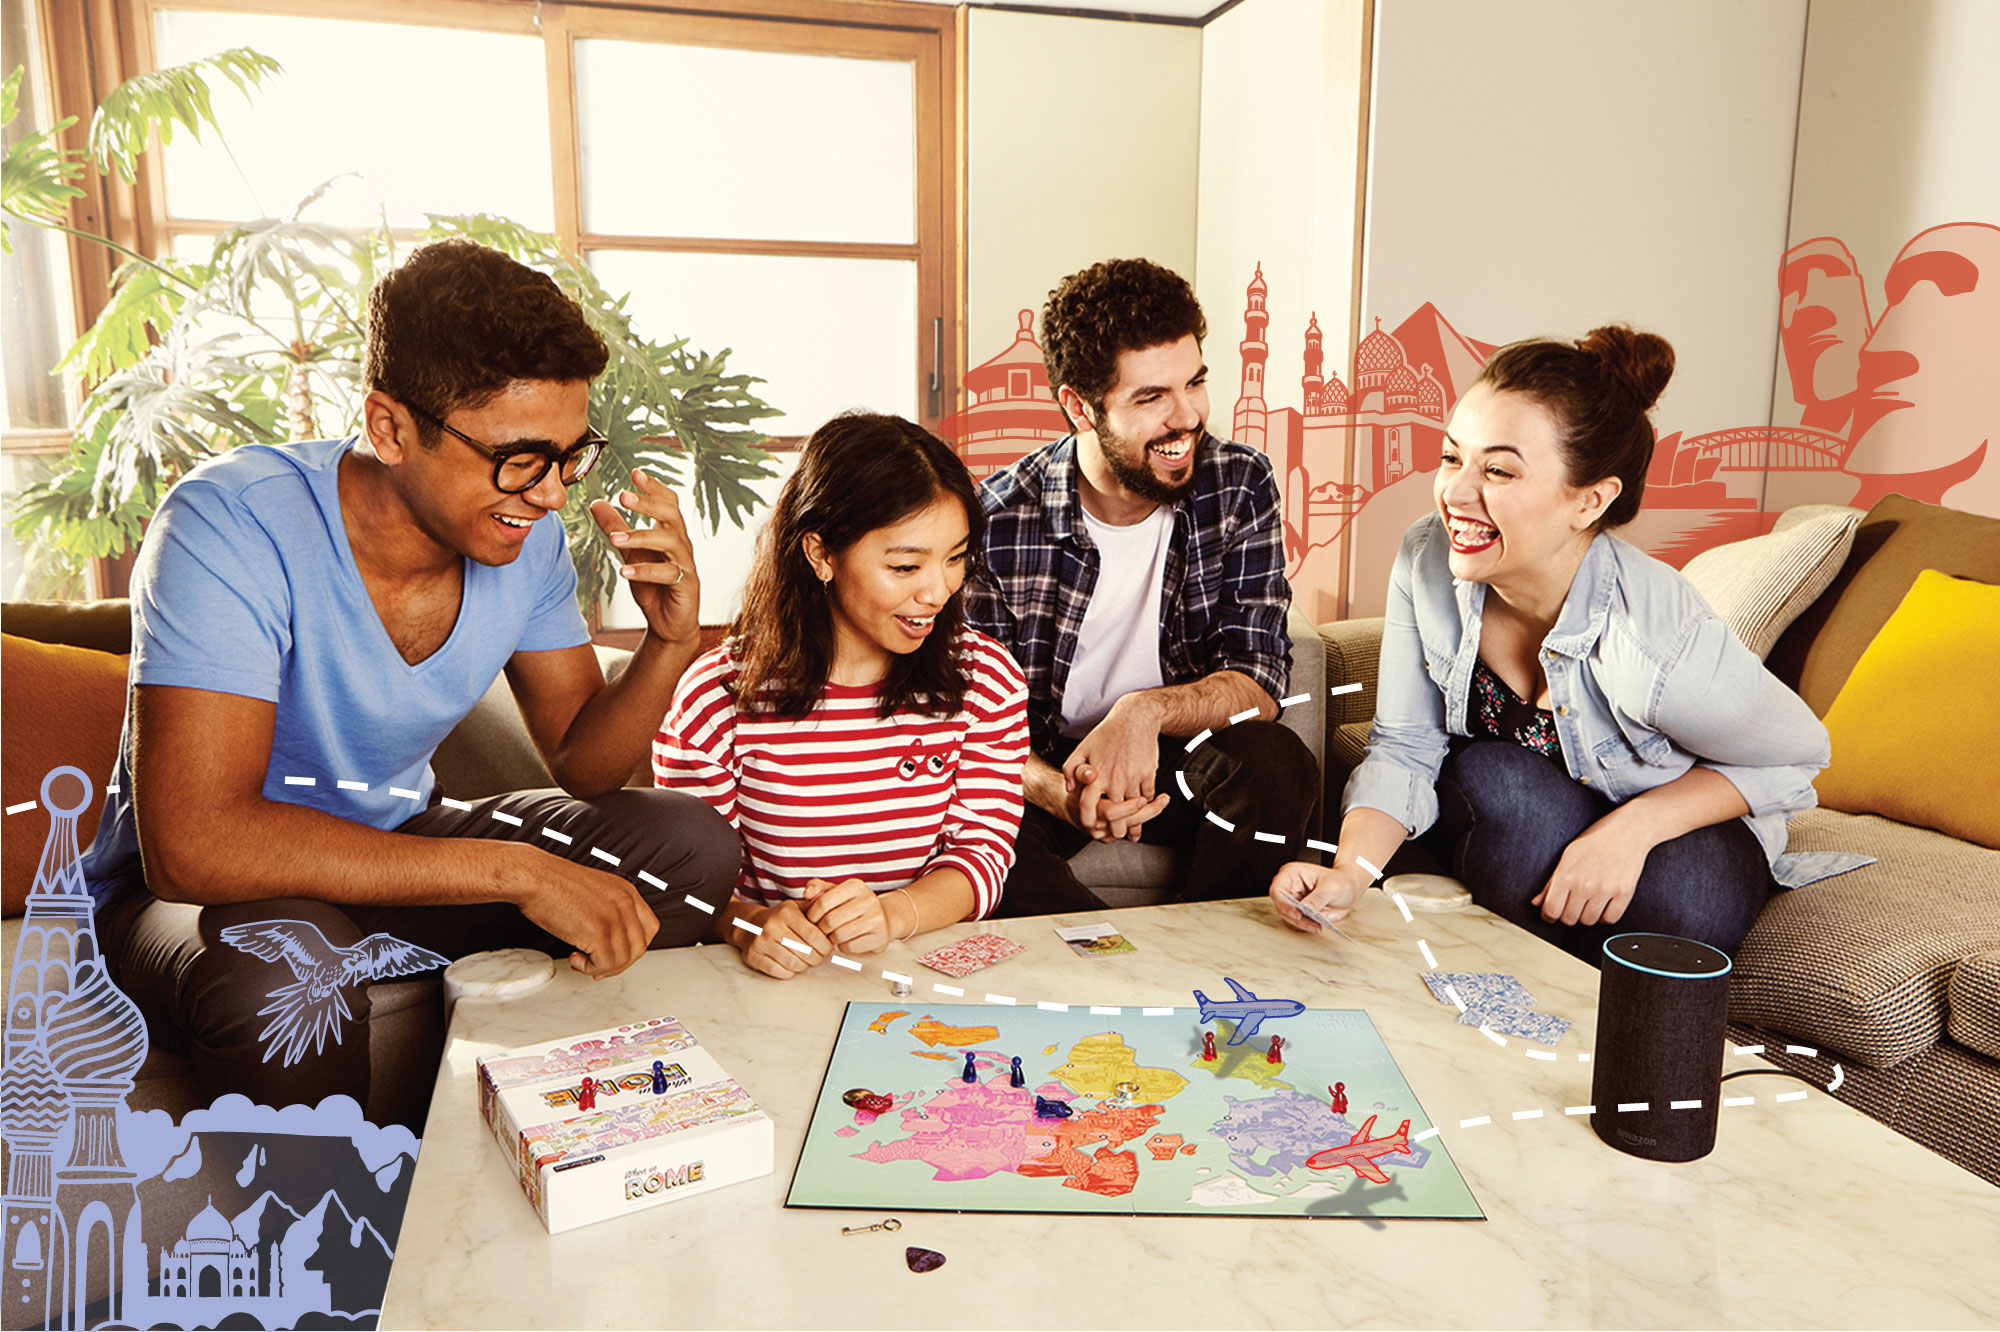 Meet people around the world with games on Alexa and Google Assistant